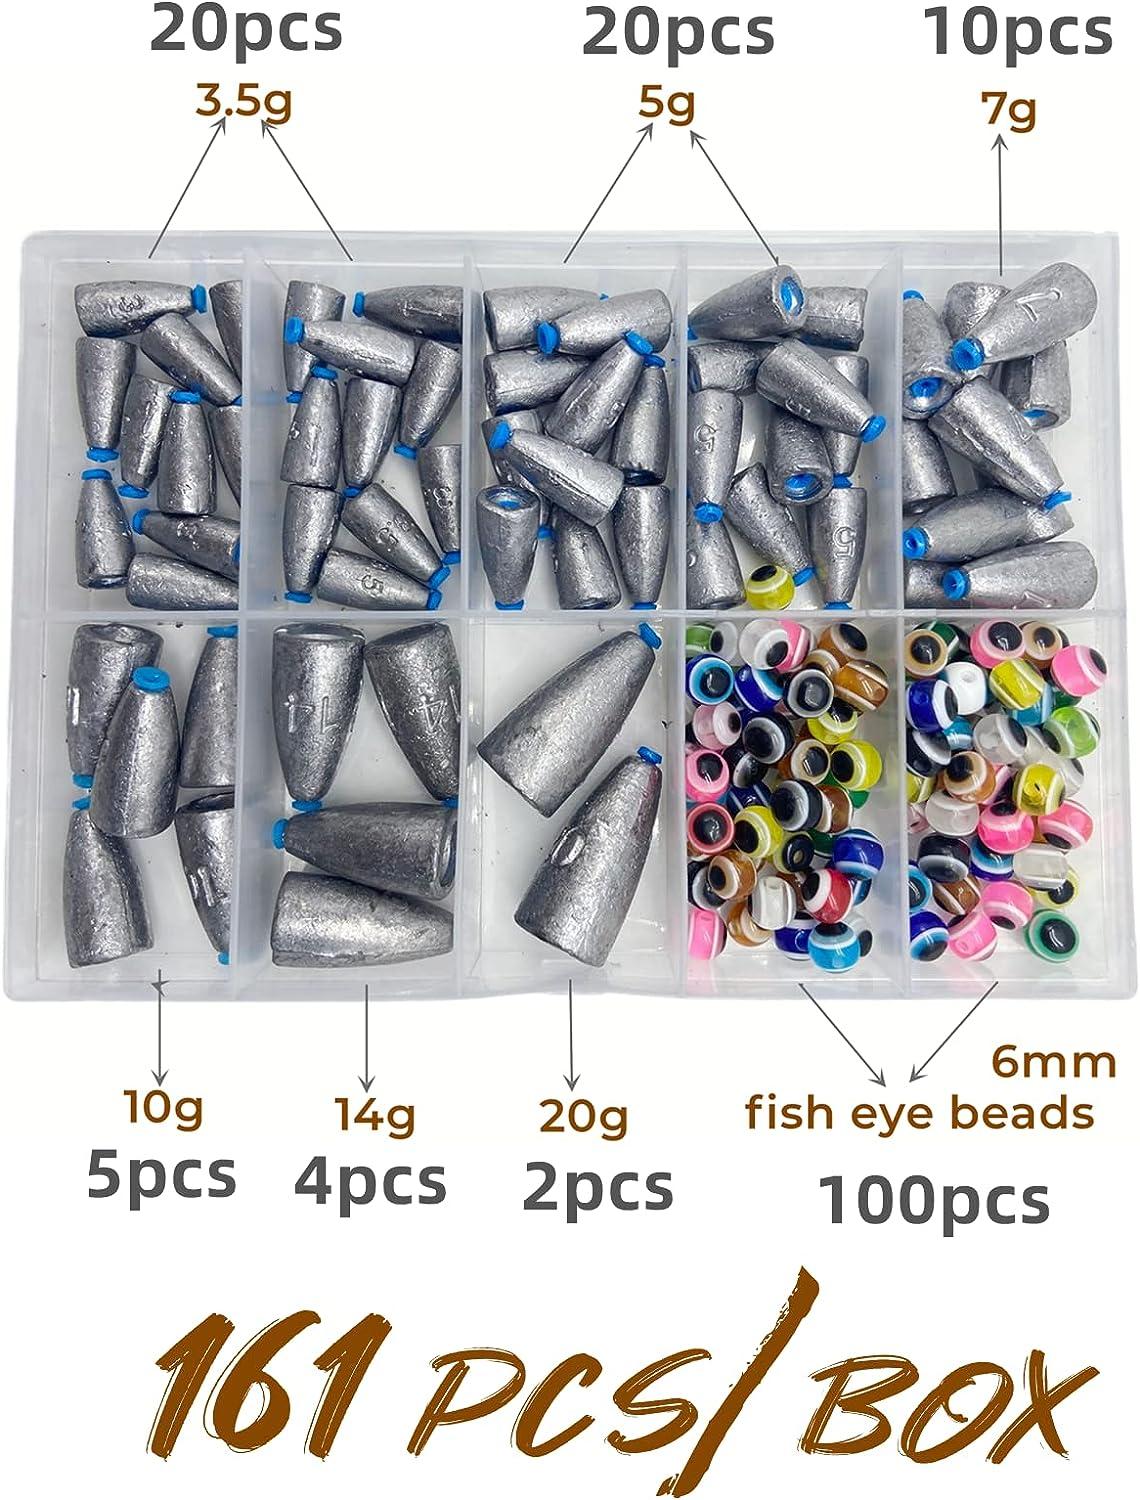 DAMIDEL 161Pcs/Box Worm Fishing Sinker Weights Kit with Soft